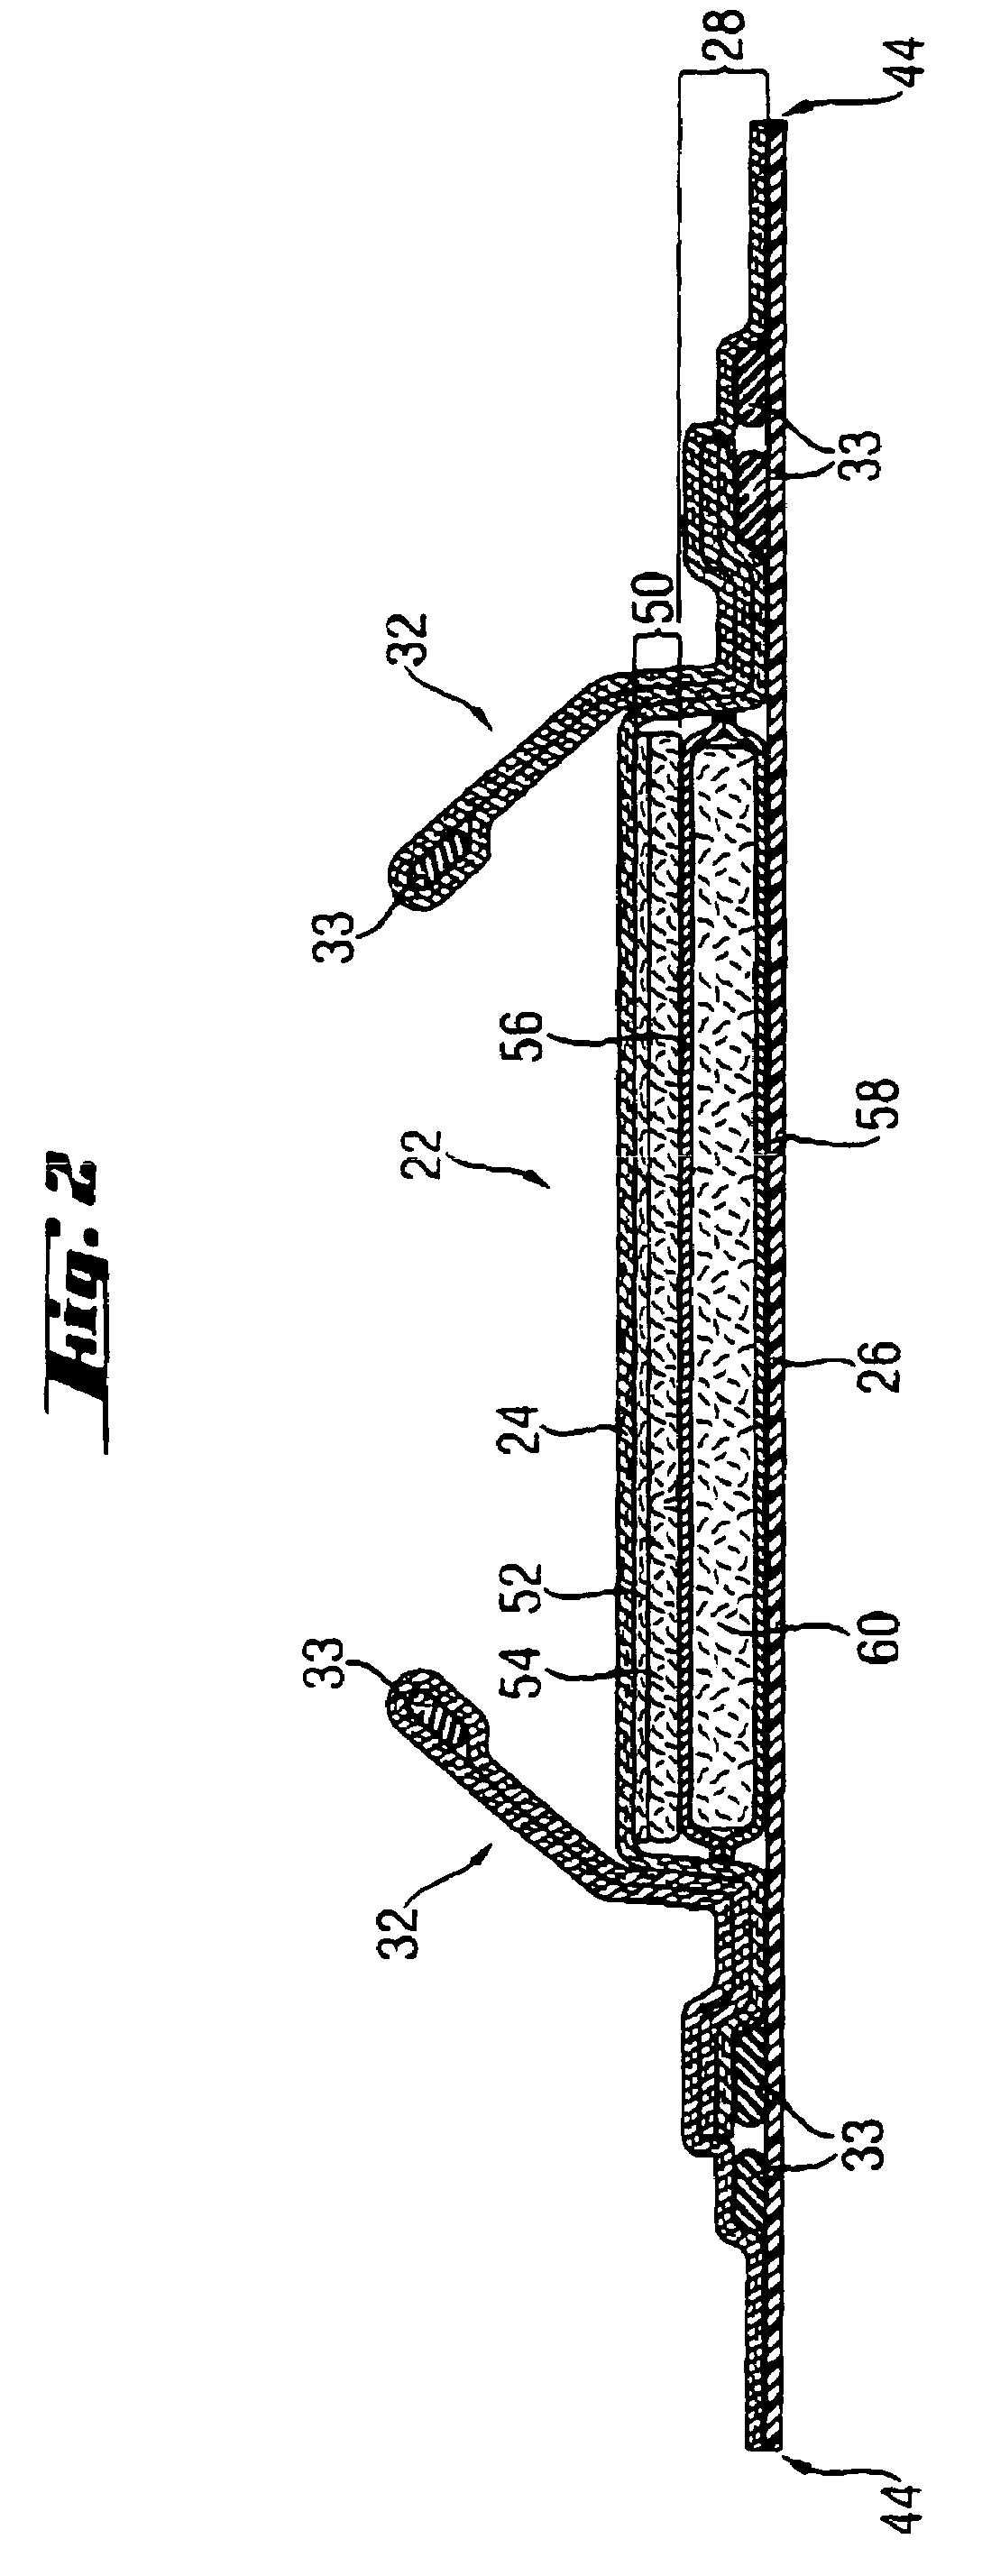 Superabsorbent polymers having radiation activatable surface cross-linkers and method of making them